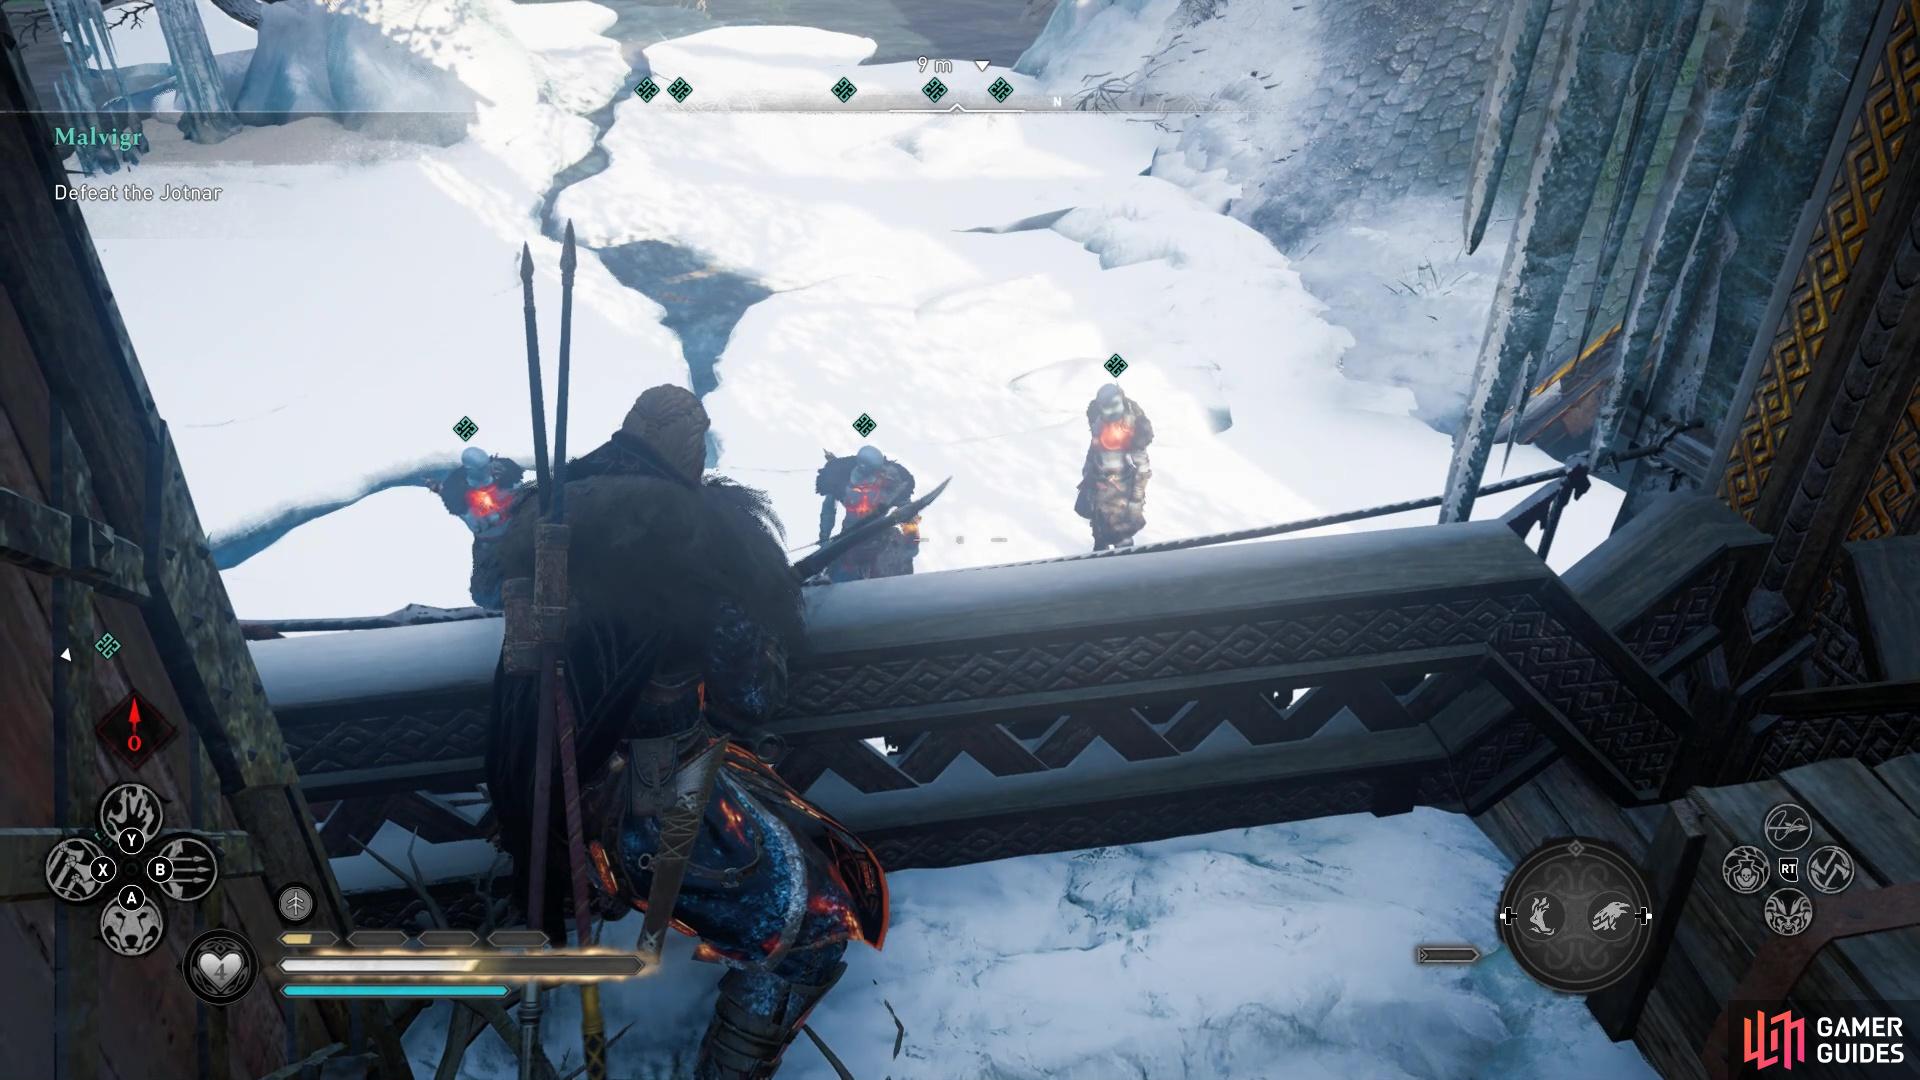 You'll need to fight off the Jotun enemies outside.